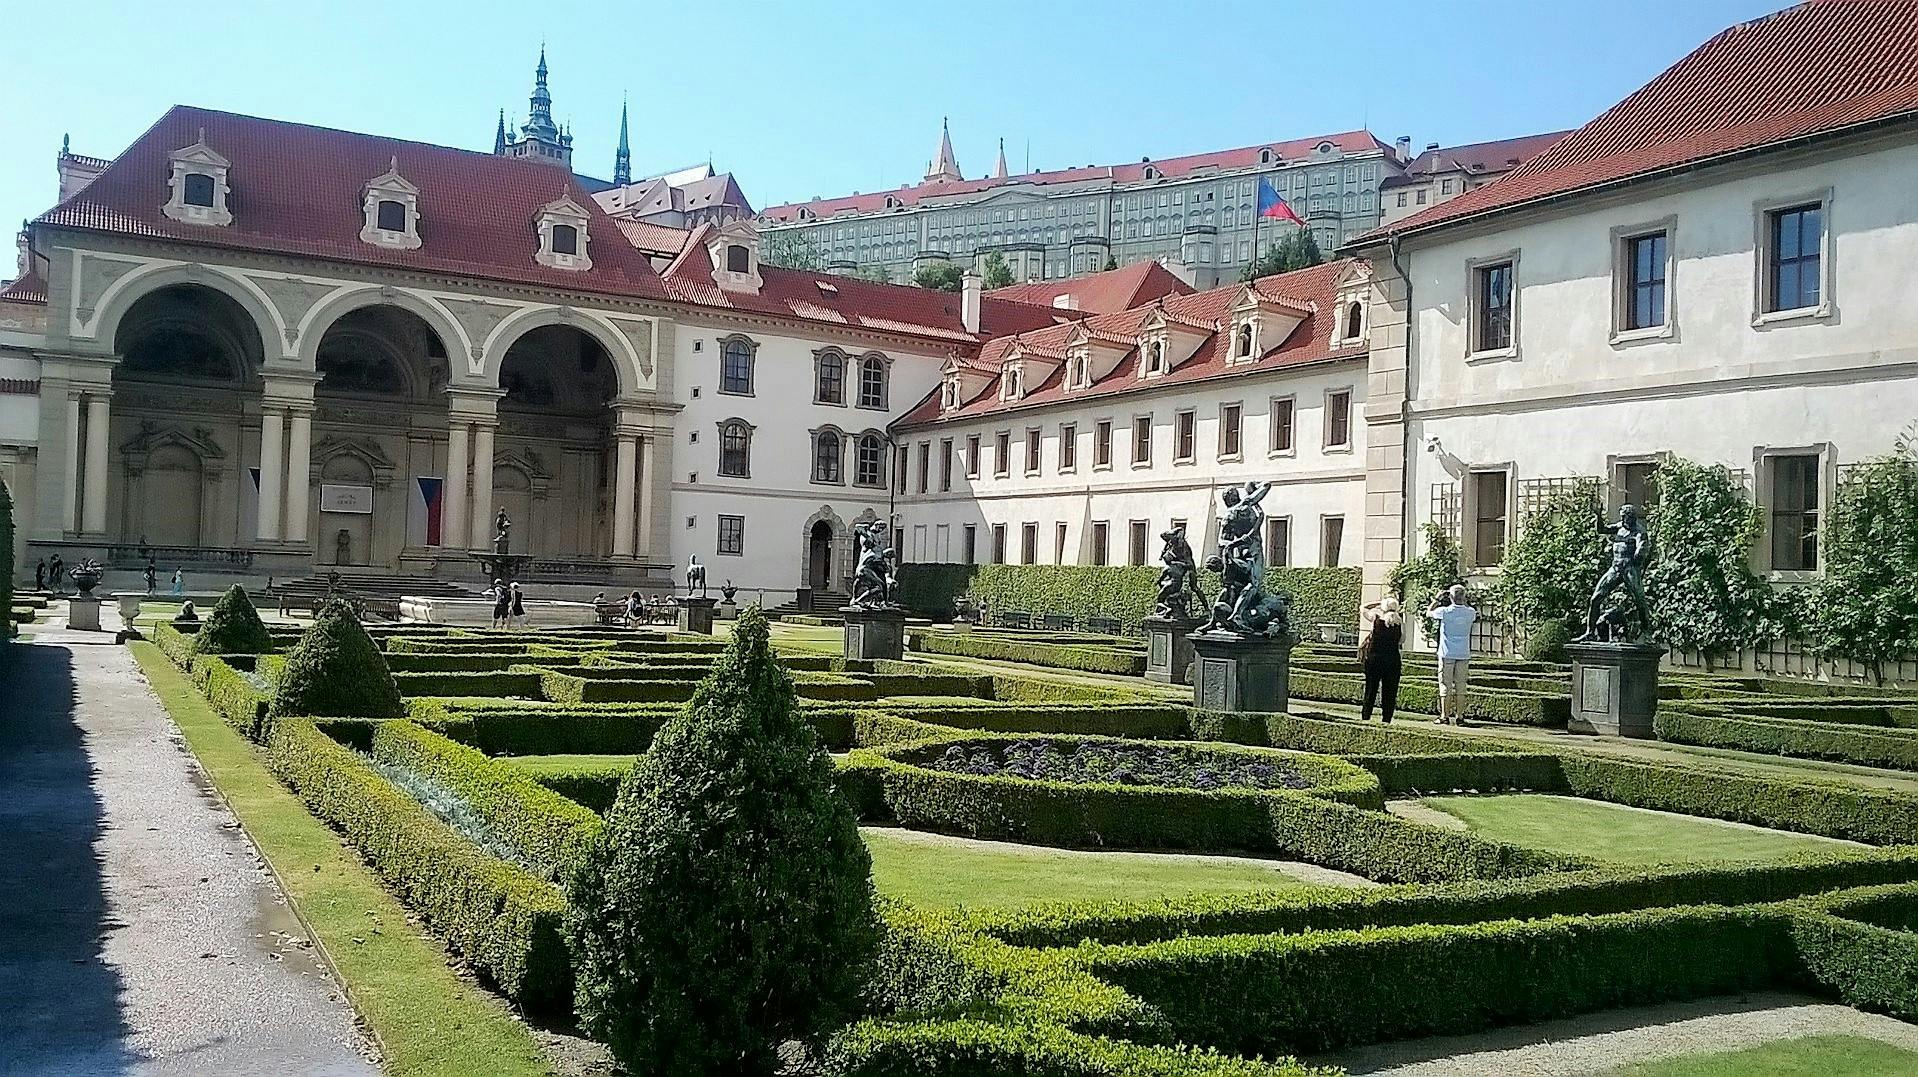 Must-sees of Prague guided tour with Wallenstein Palace Gardens